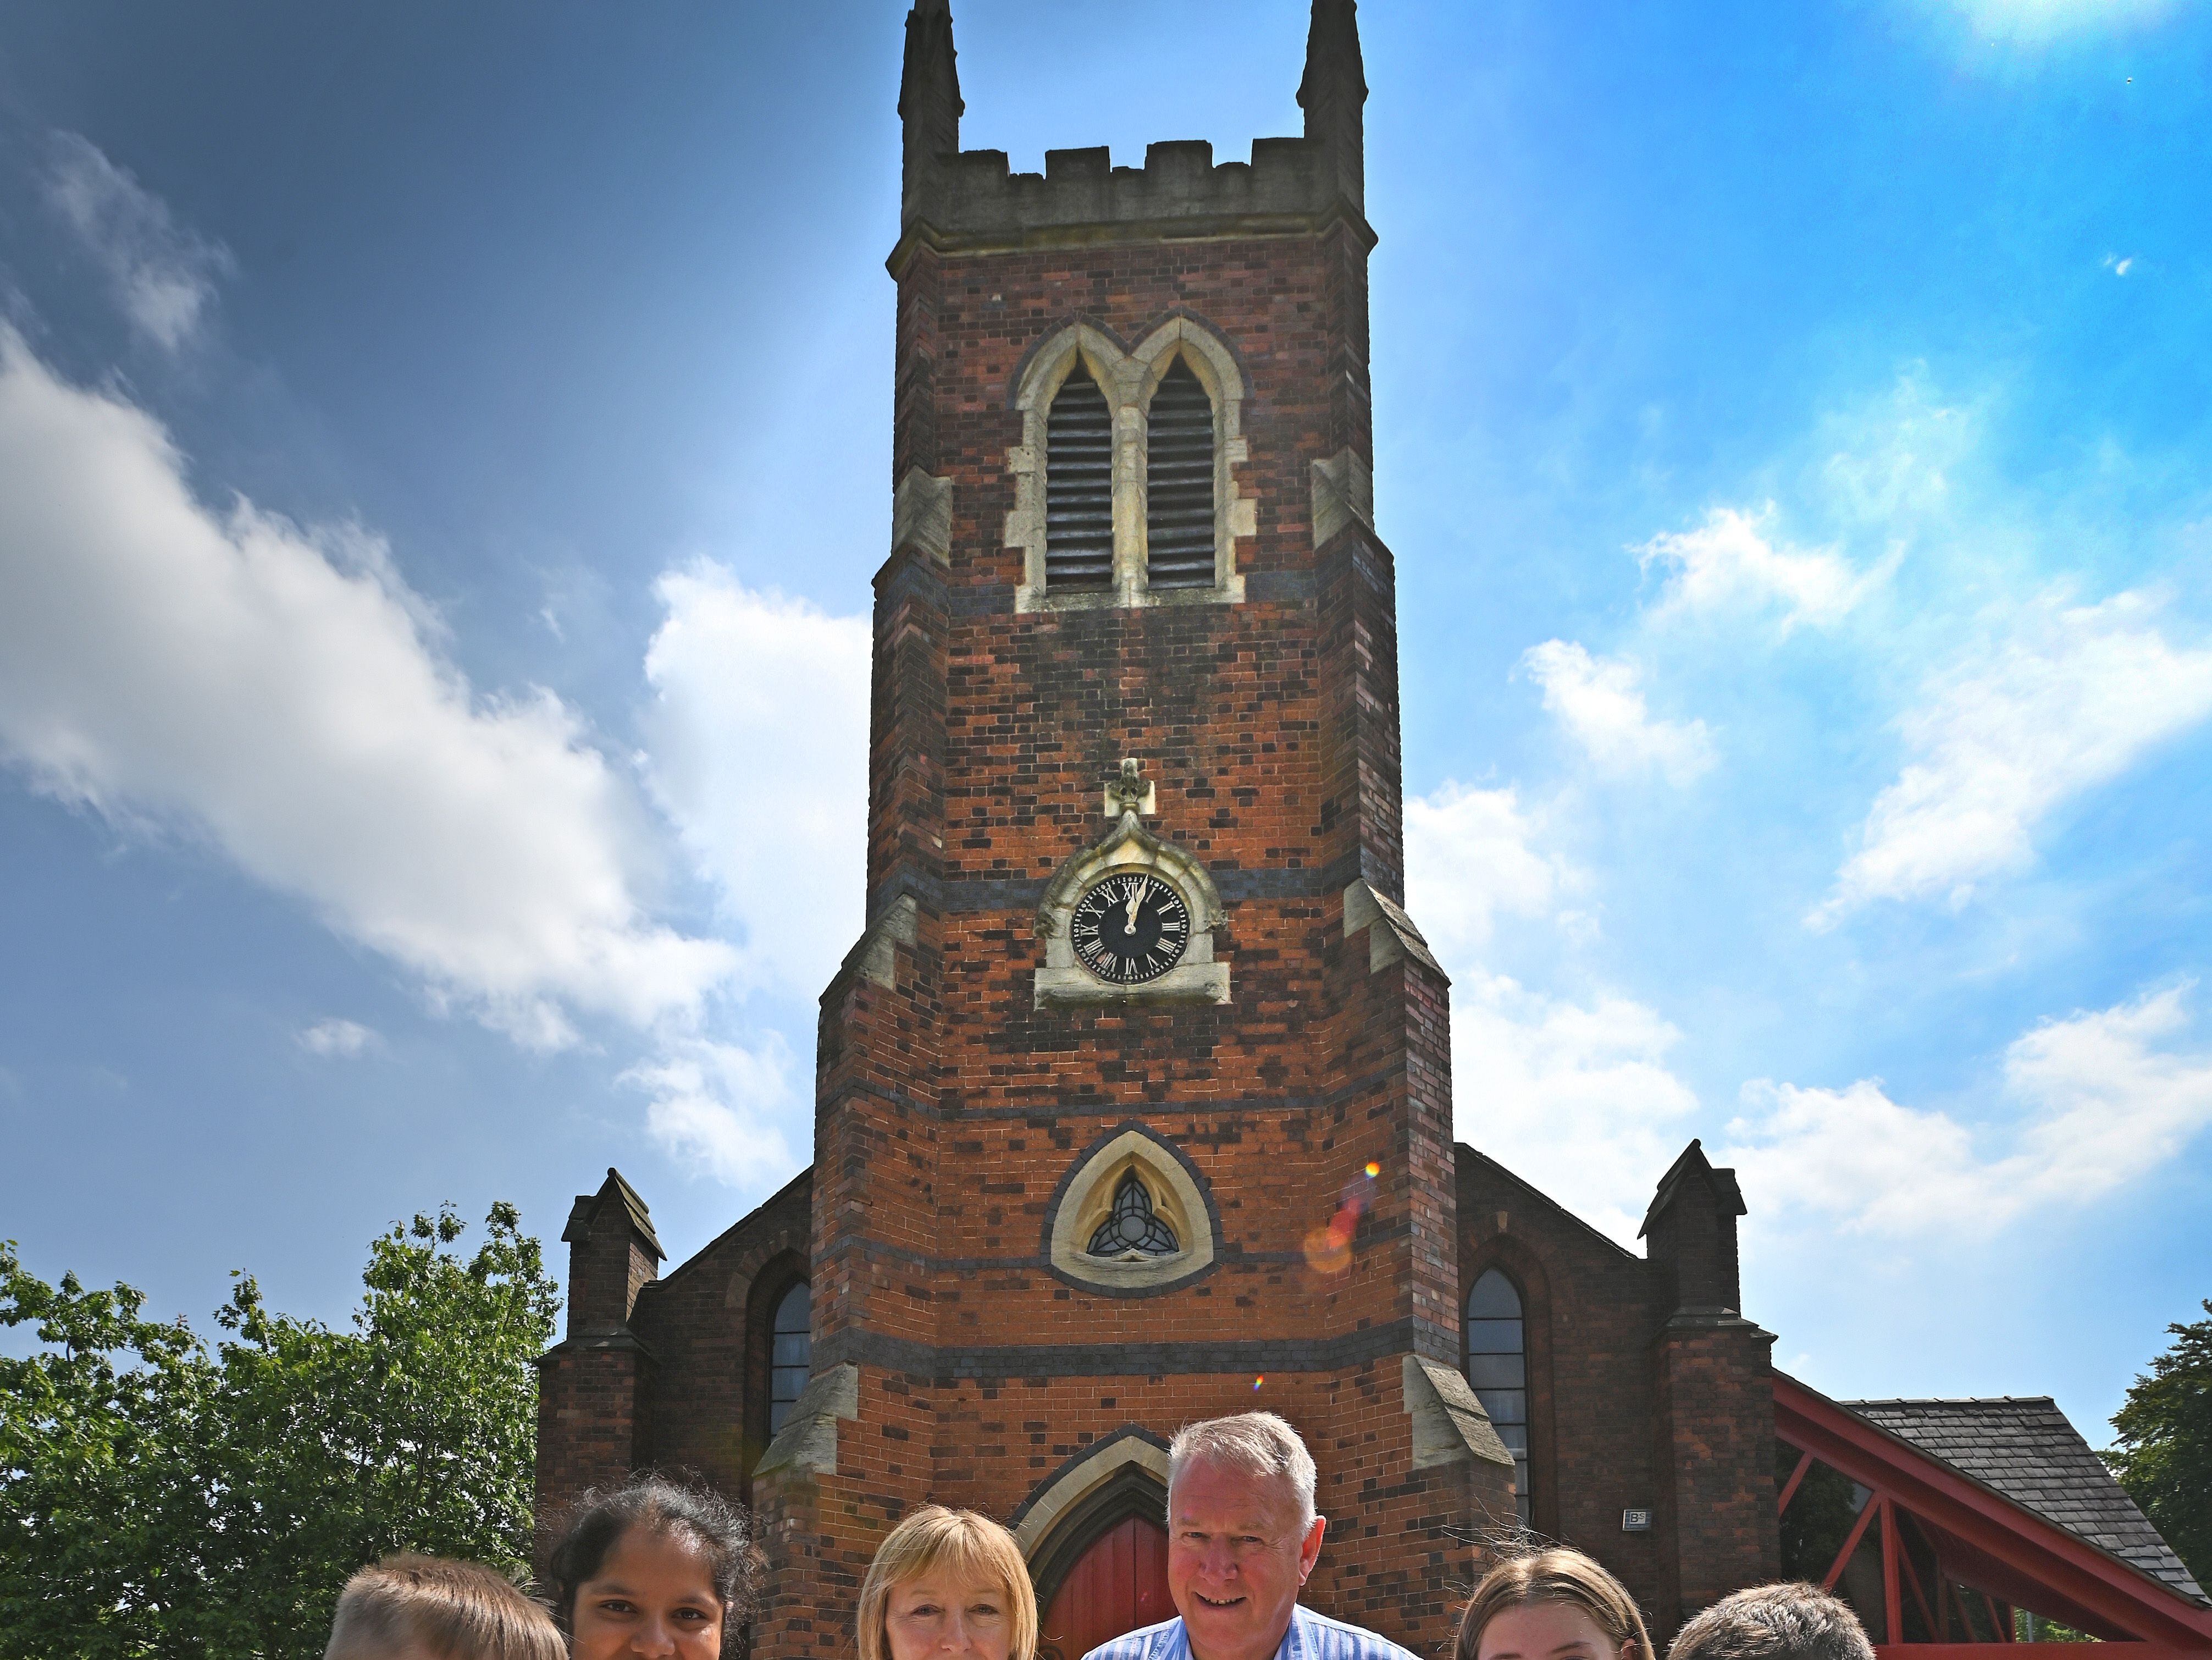 Pupils and parishioners old and new come together to celebrate Pelsall community